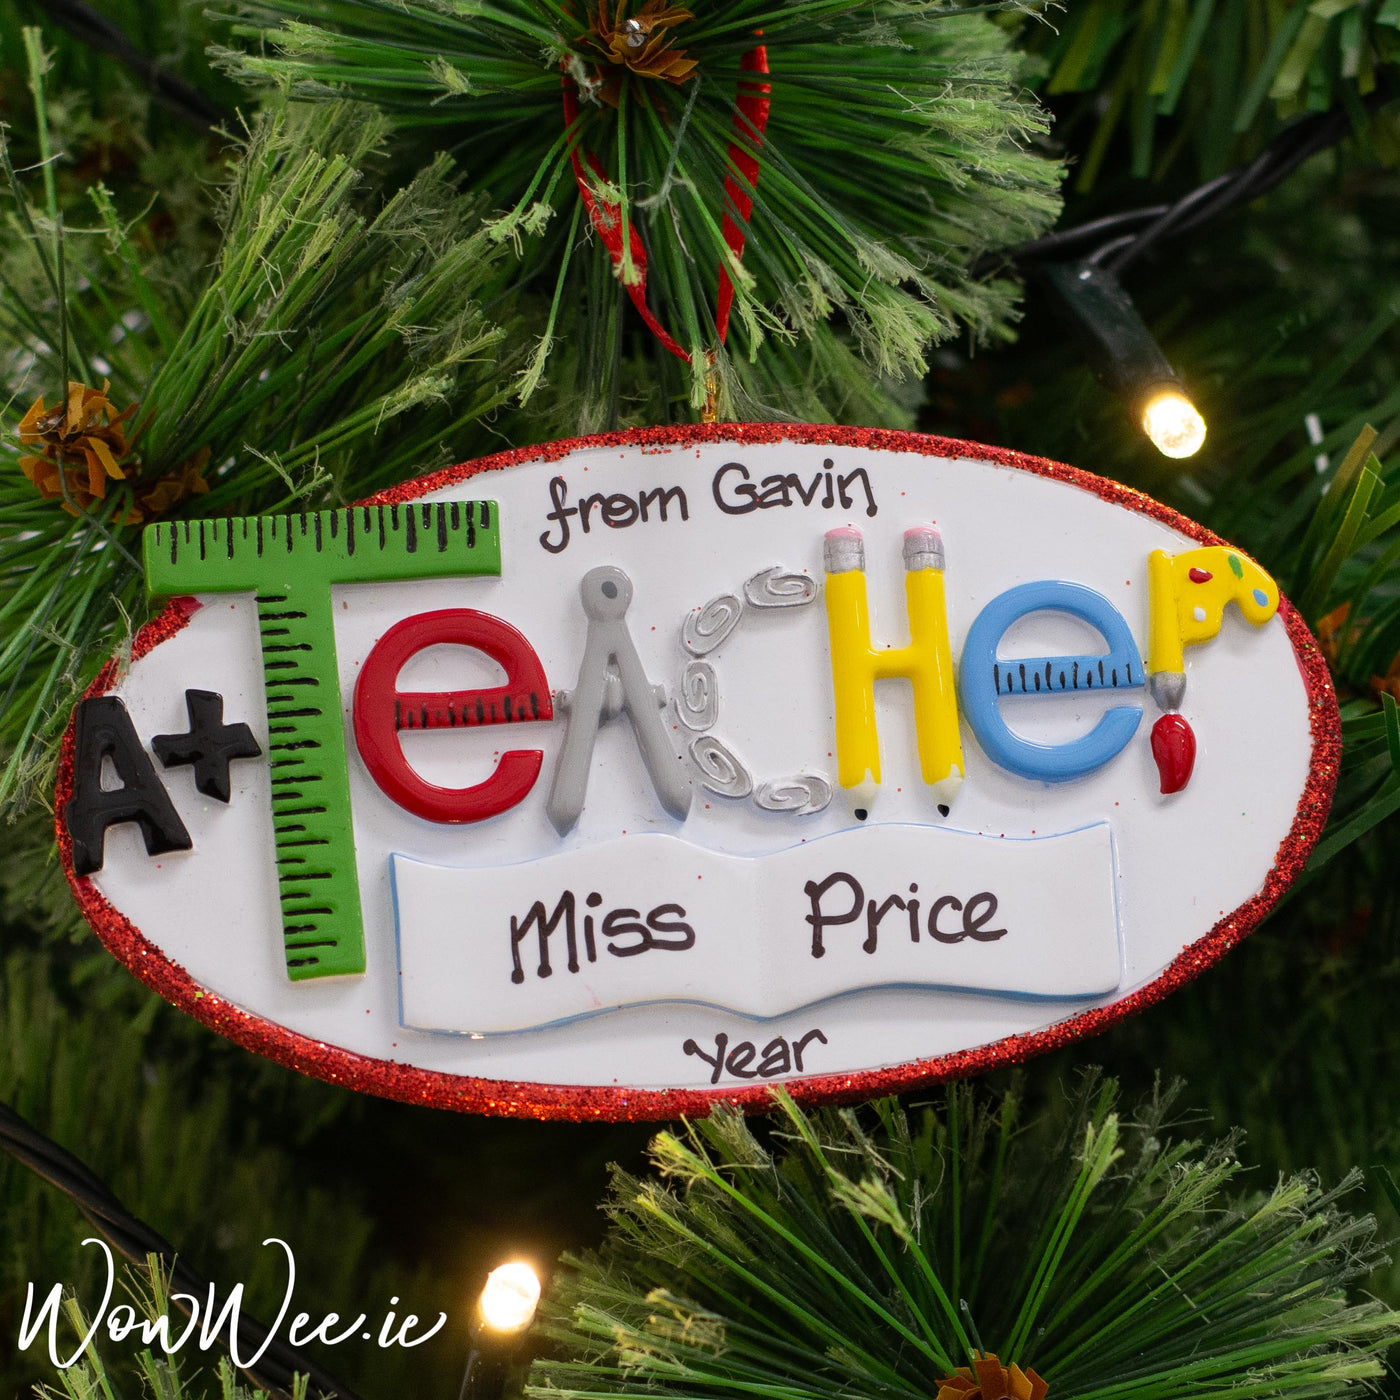 Personalised Christmas Ornament to wish your favourite teacher a very Merry Christmas and to say Thank You.